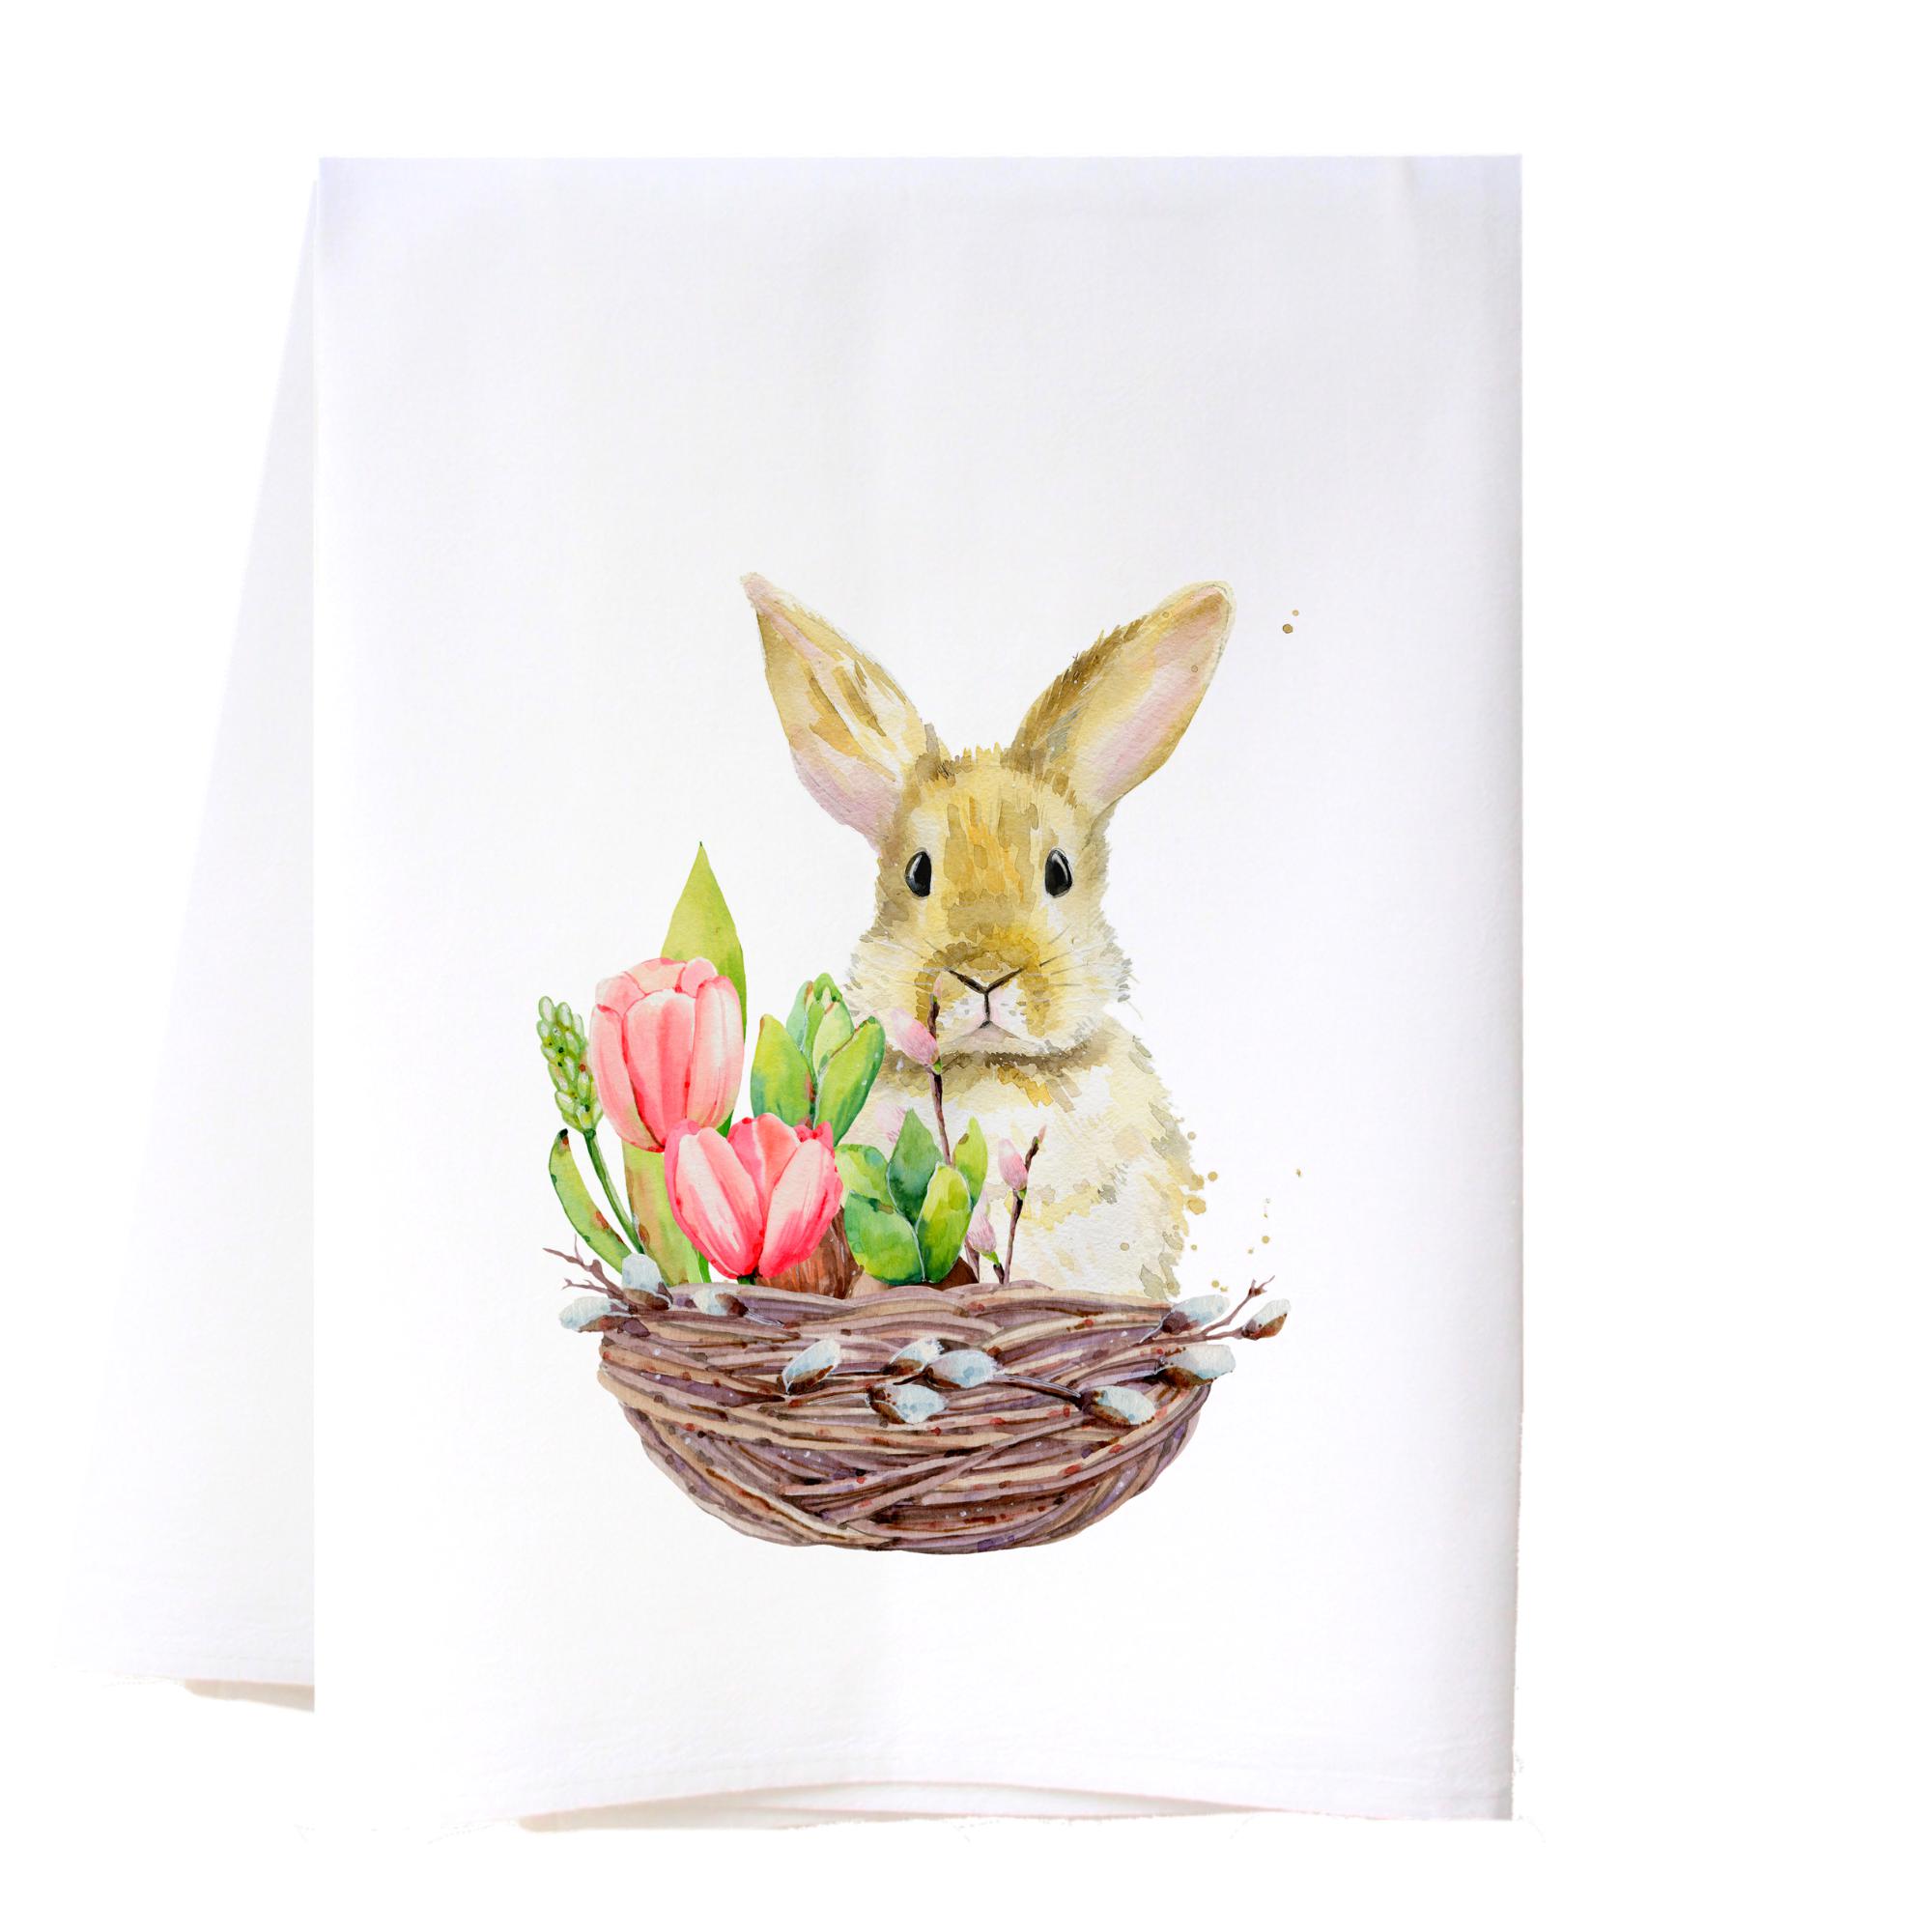 Bunny in Basket Flour Sack Towel Kitchen Towel/Dishcloth - Southern Sisters